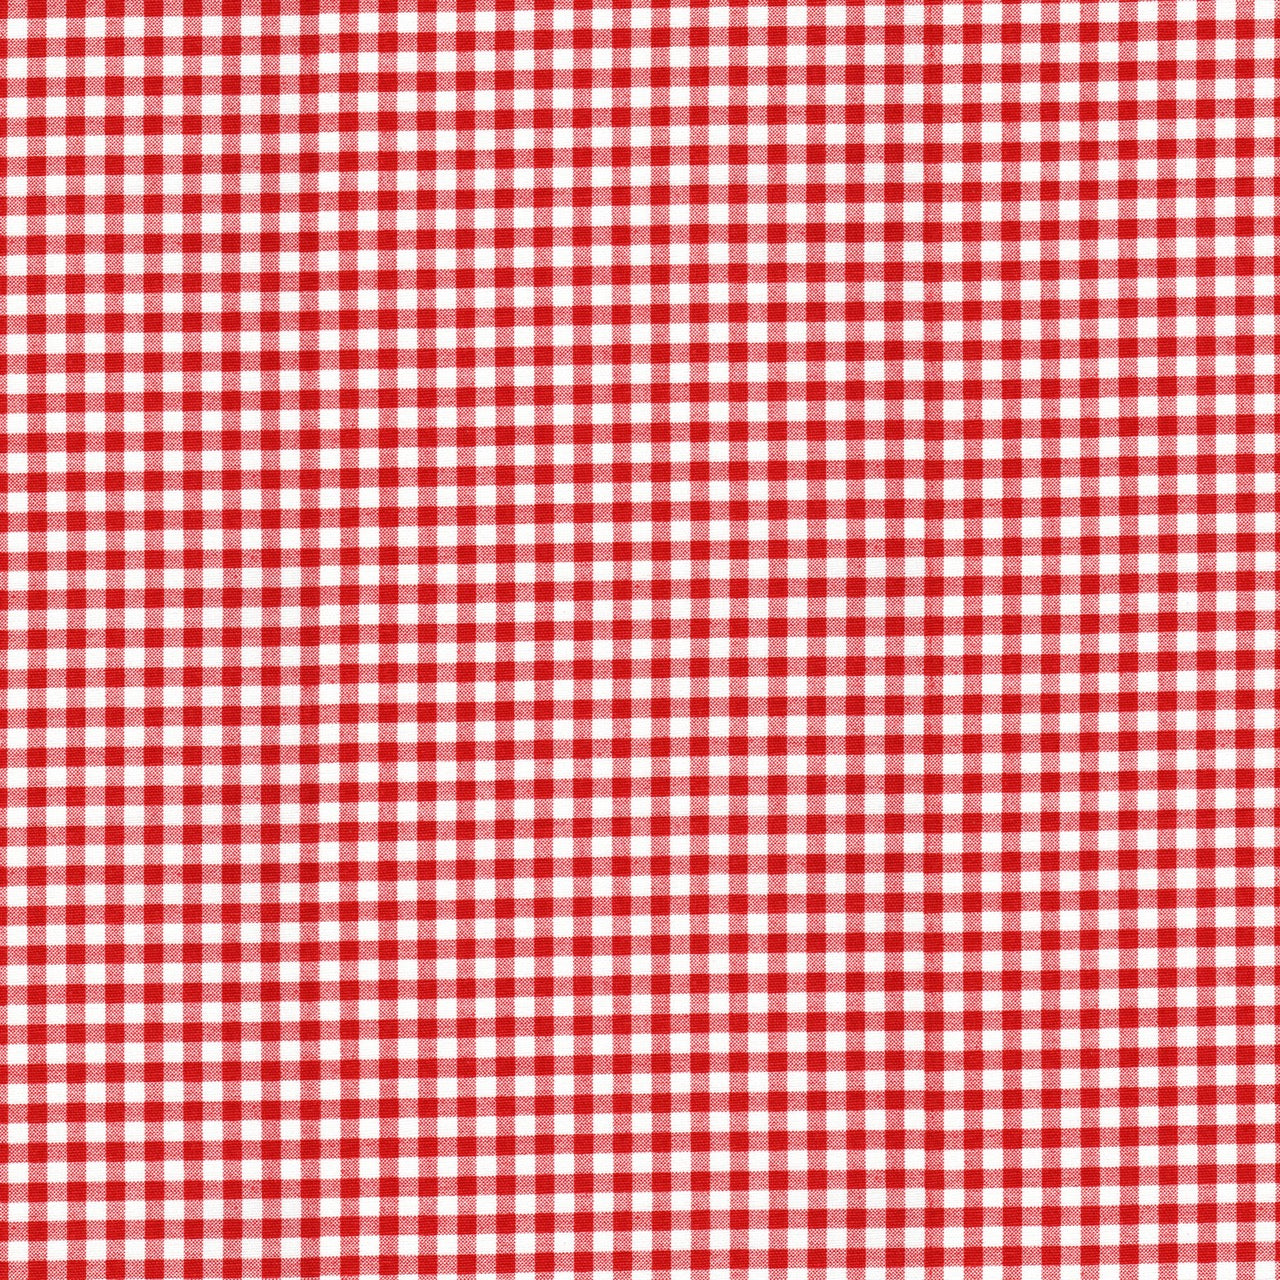 Tie-up Valance in Lipstick Red Large Gingham Check on White